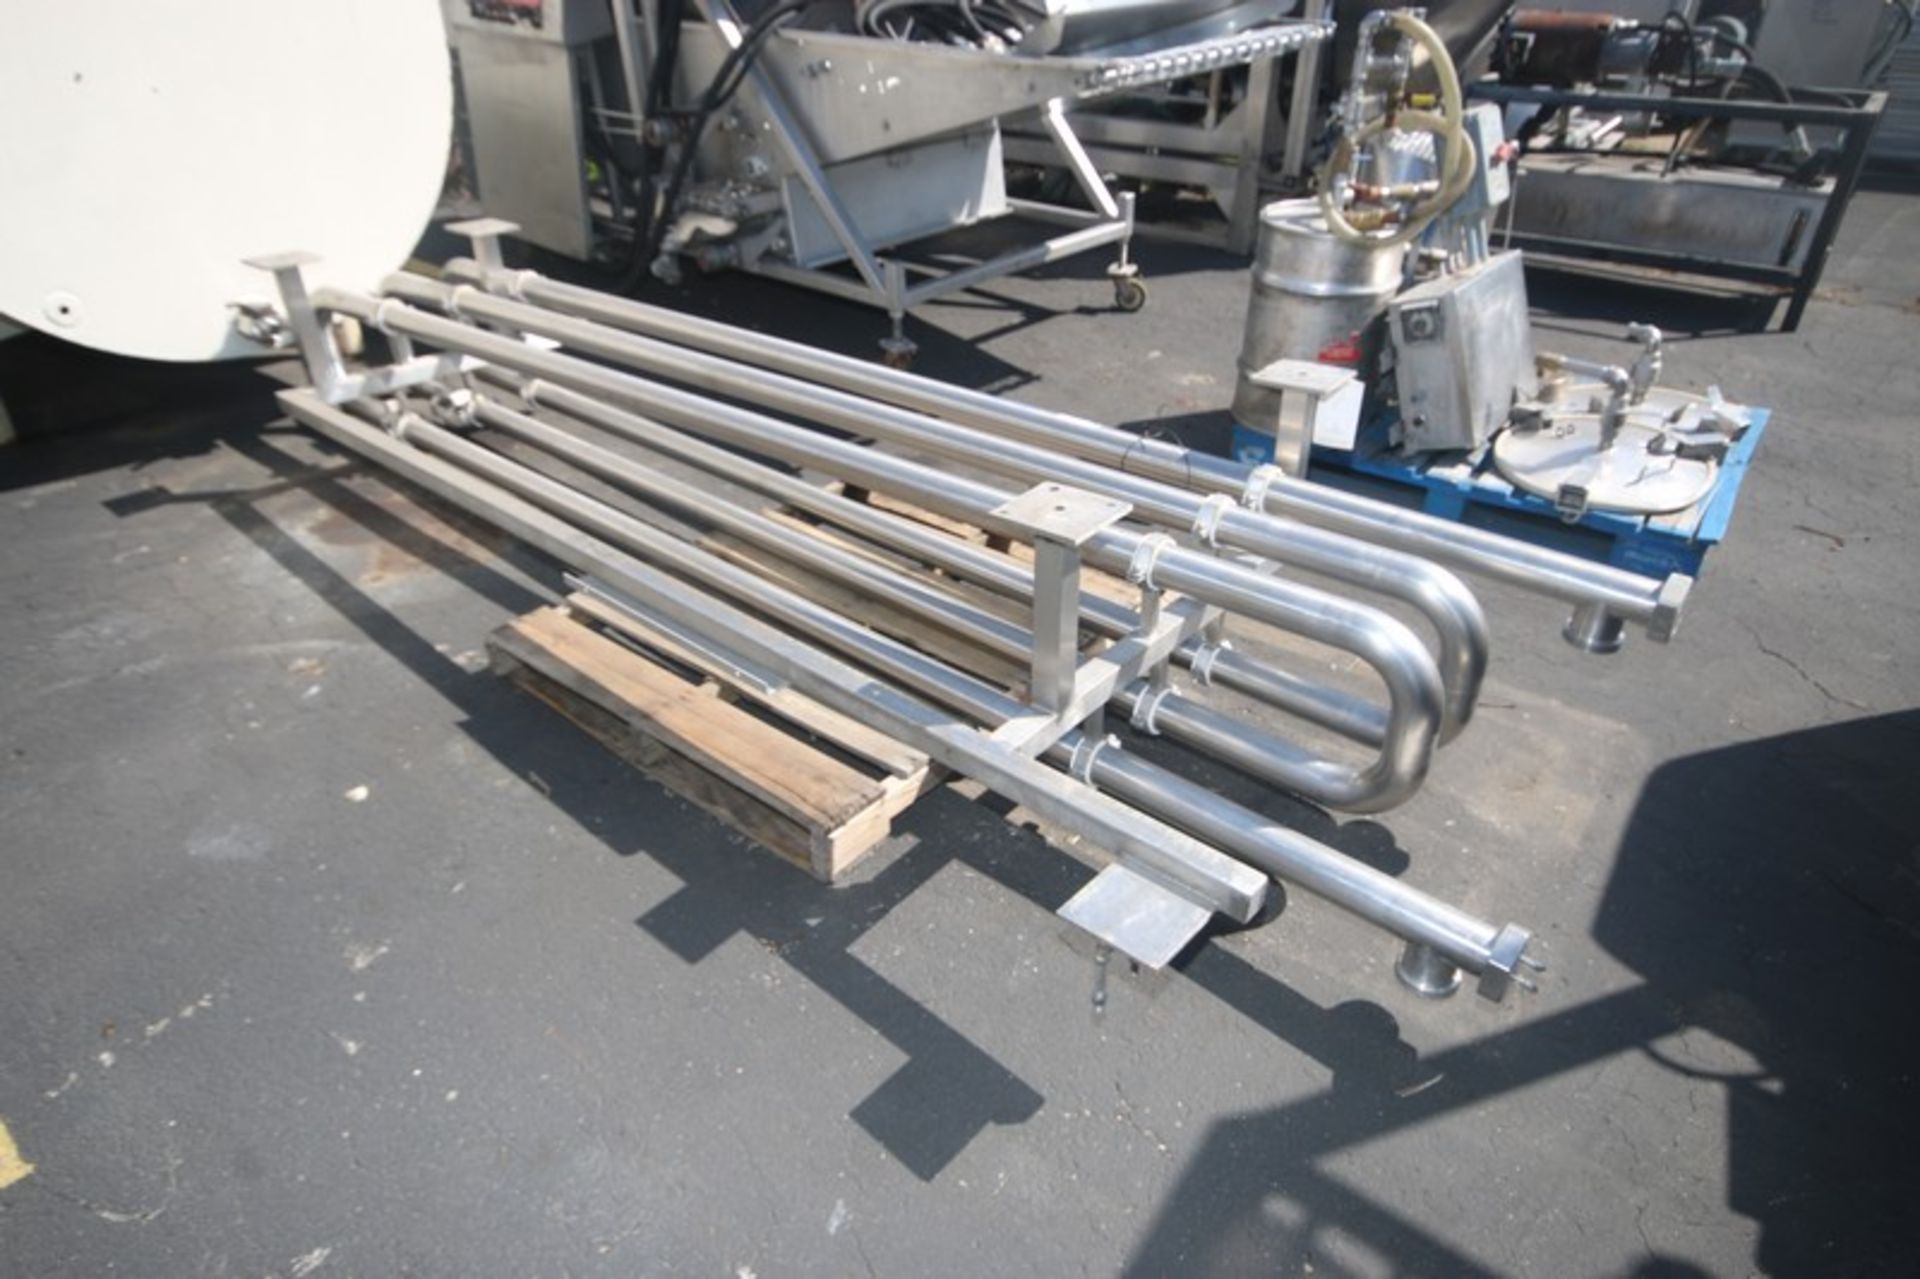 3-Pass 3" S/S Holding Tube,Aprox. 11' L, Mounted on S/S Frame (INV#69014)(LOCATED AT MDG AUCTION - Image 3 of 4